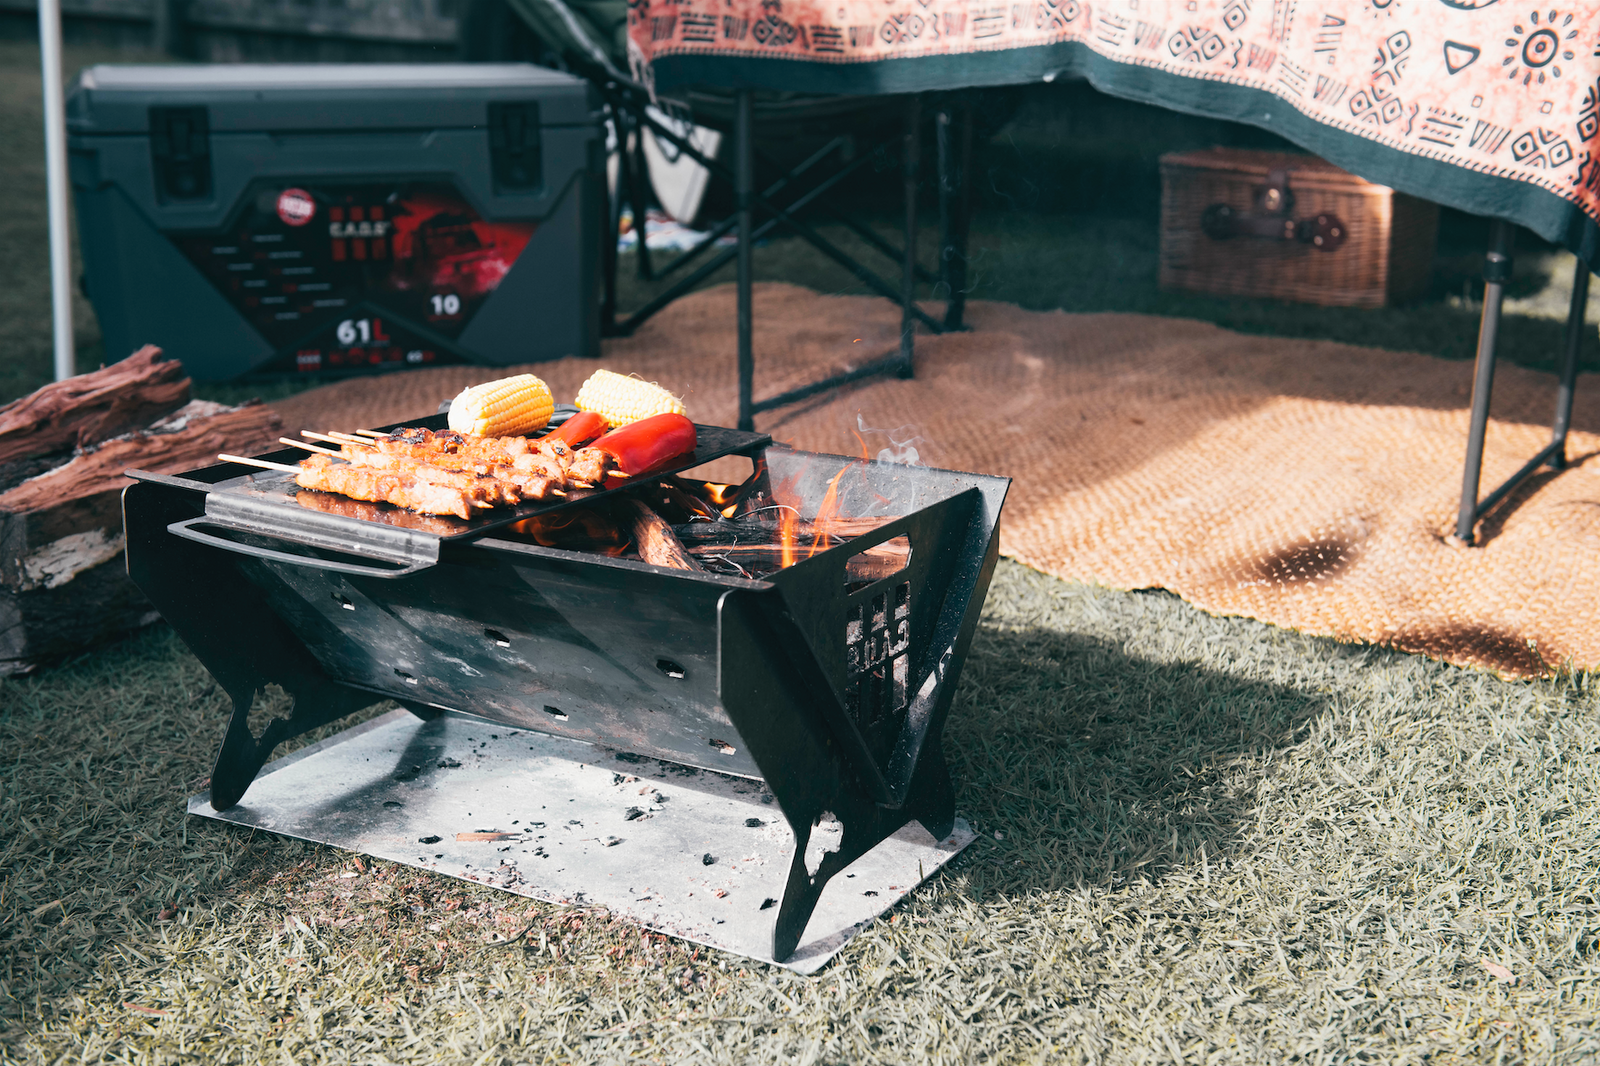 The Top 5 Camping Essential Items You Need This School Holidays